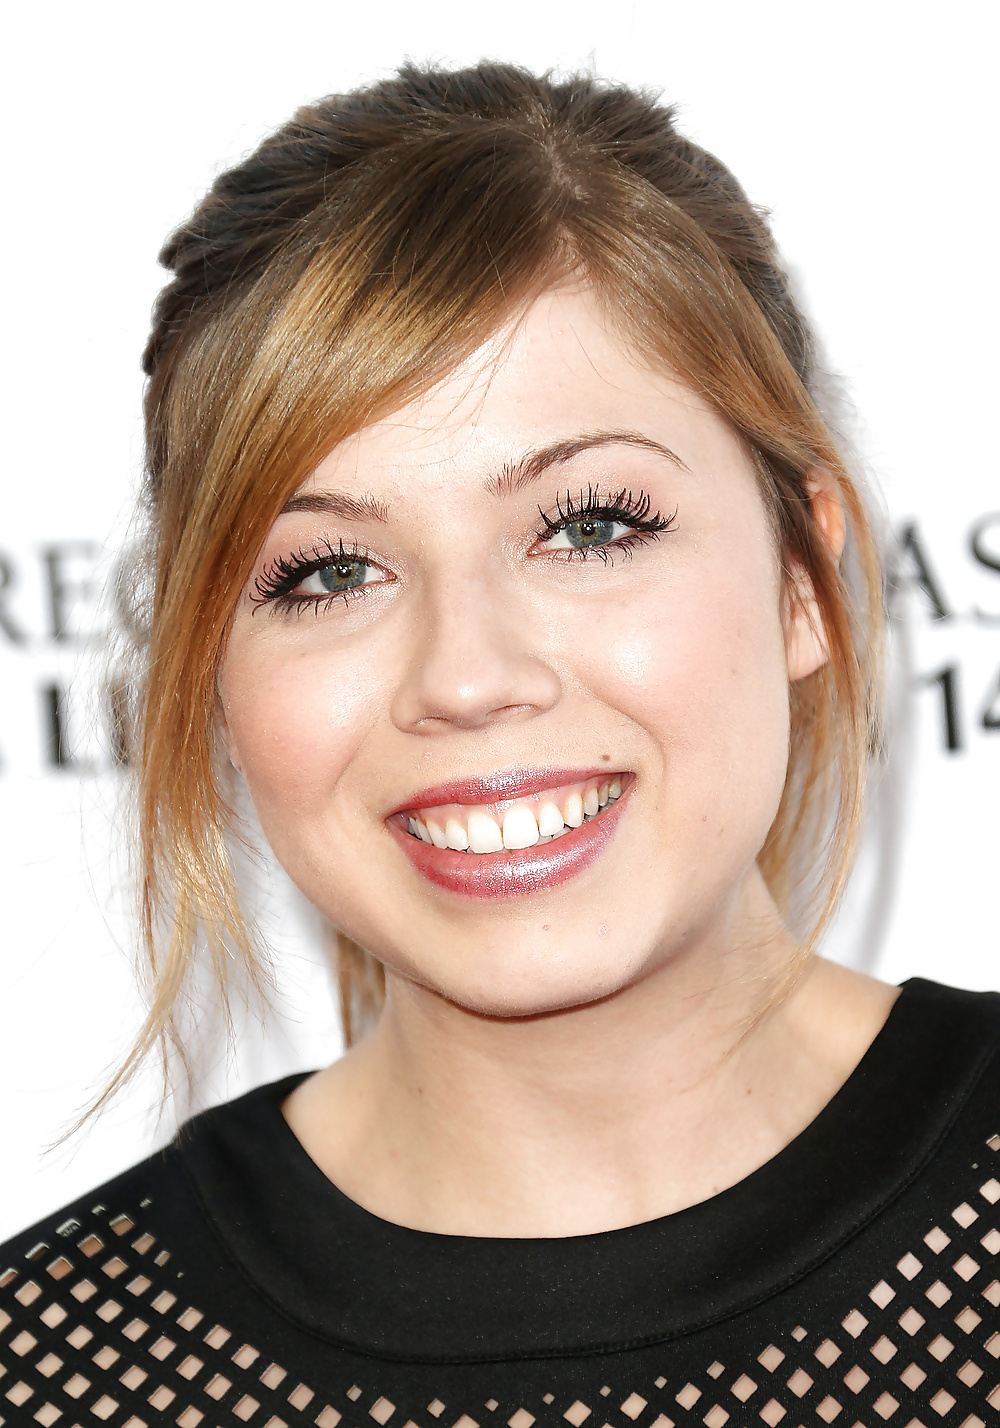 Jennette mccurdy - top nero e gonna rossa - icarly
 #28077896